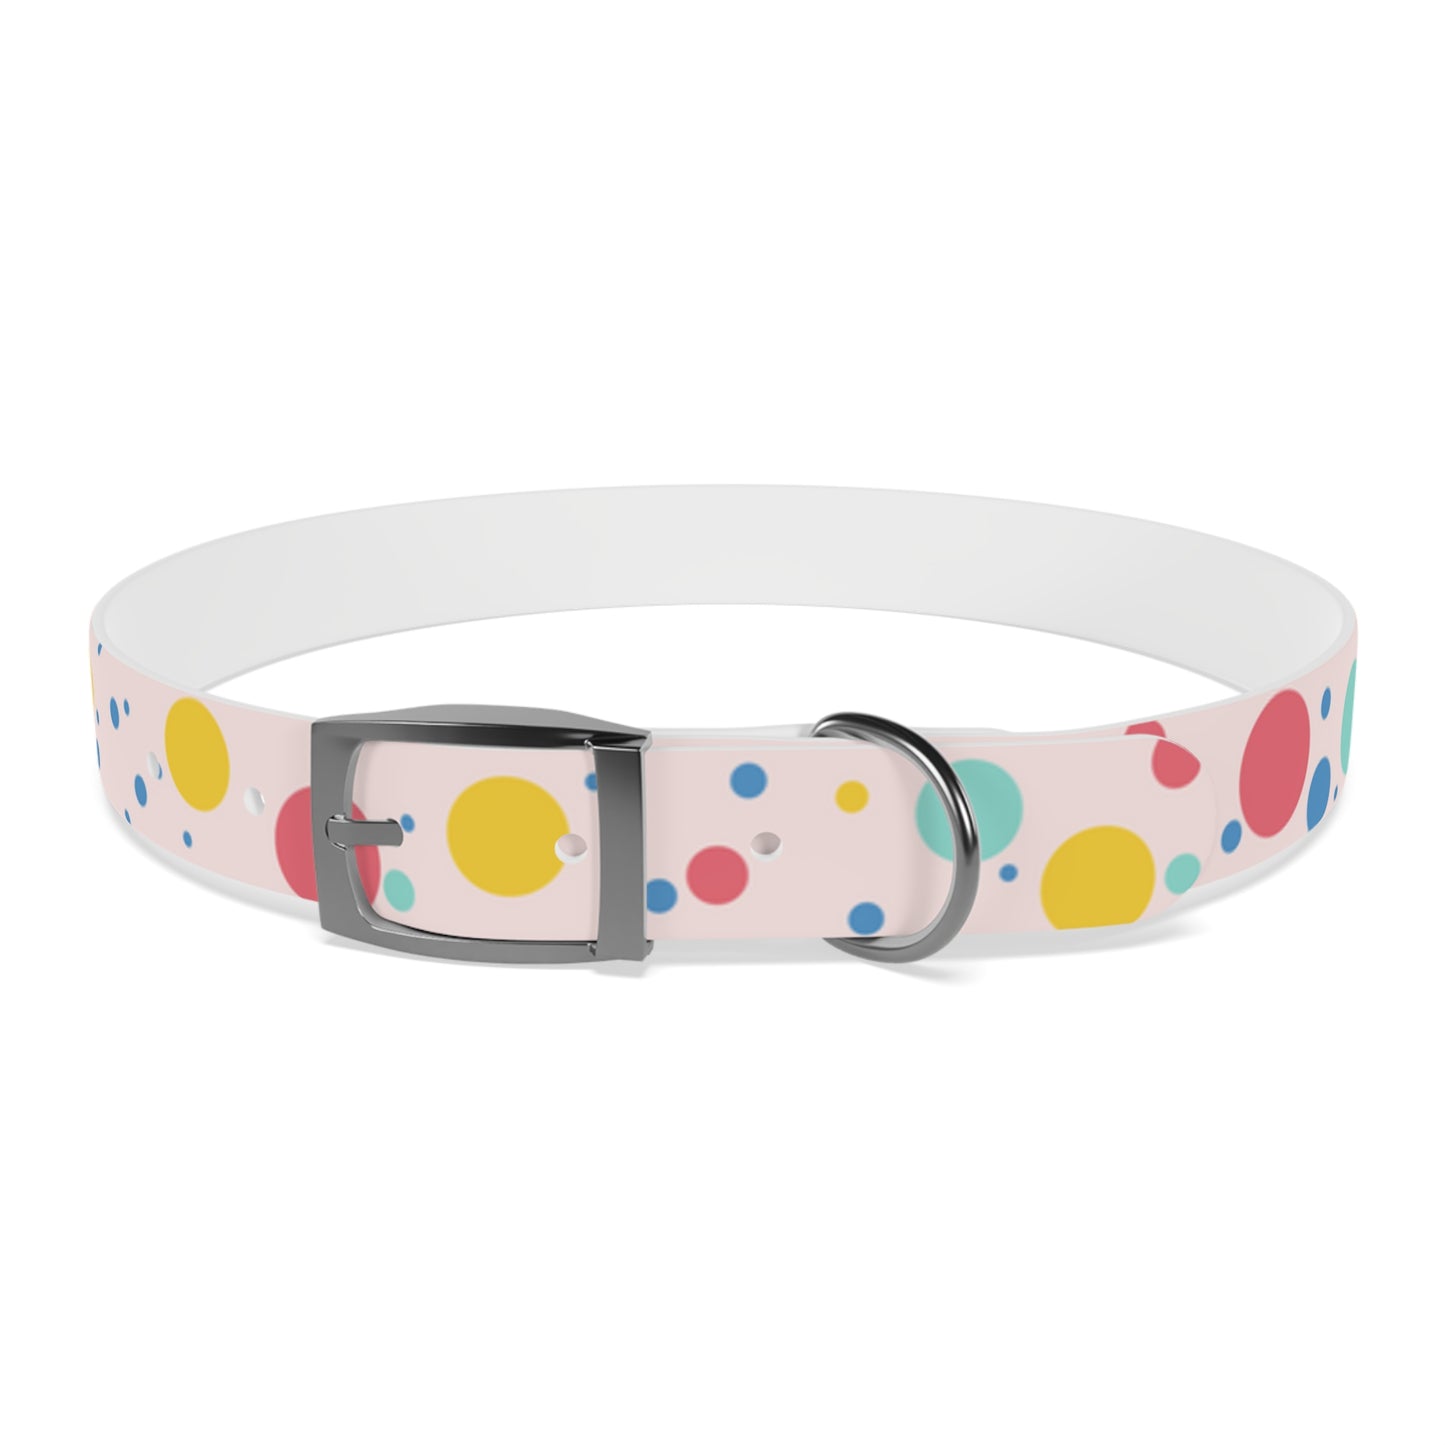 Pawlished PolkaDot Hypoallergenic Pup Dog Collar -Choose Size and Buckle Finish